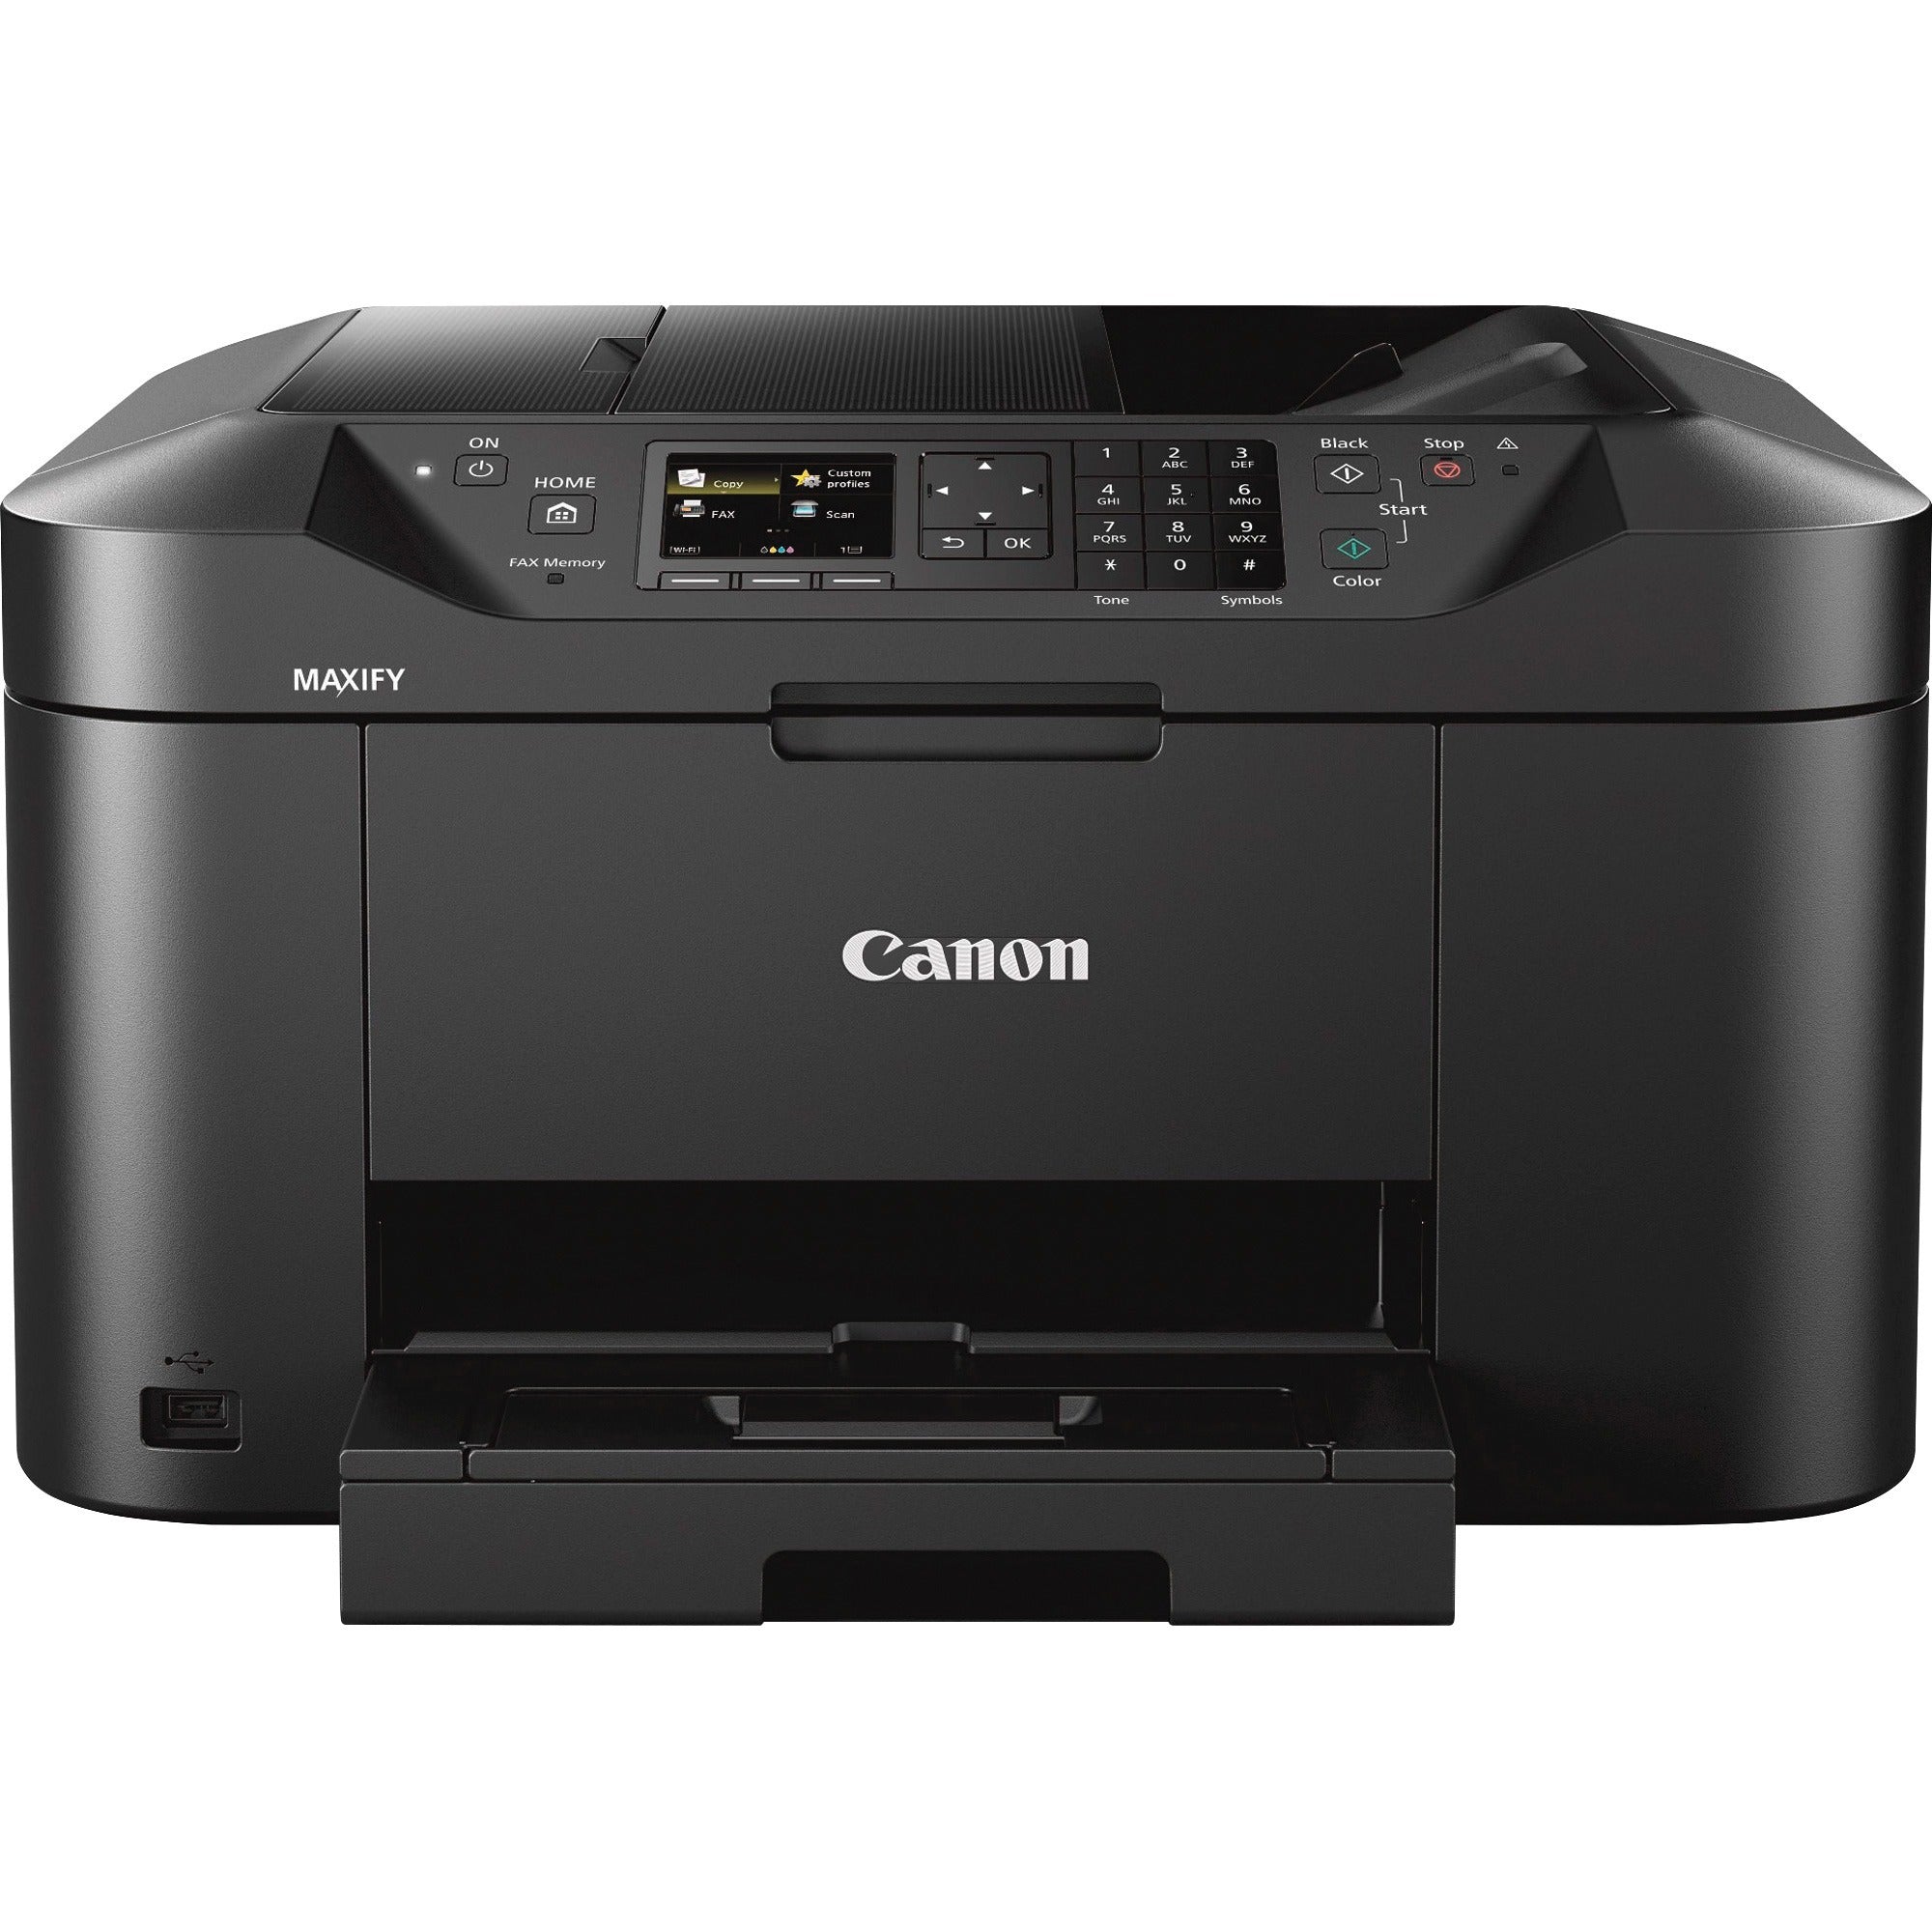 Canon MAXIFY MB2120 Wireless Inkjet Multifunction Printer - Color - Copier/Fax/Printer/Scanner - 600 x 1200 dpi Print - Automatic Duplex Print - Up to 20000 Pages Monthly - 250 sheets Input - Color Scanner - 1200 dpi Optical Scan - Color Fax - Ethern - 1